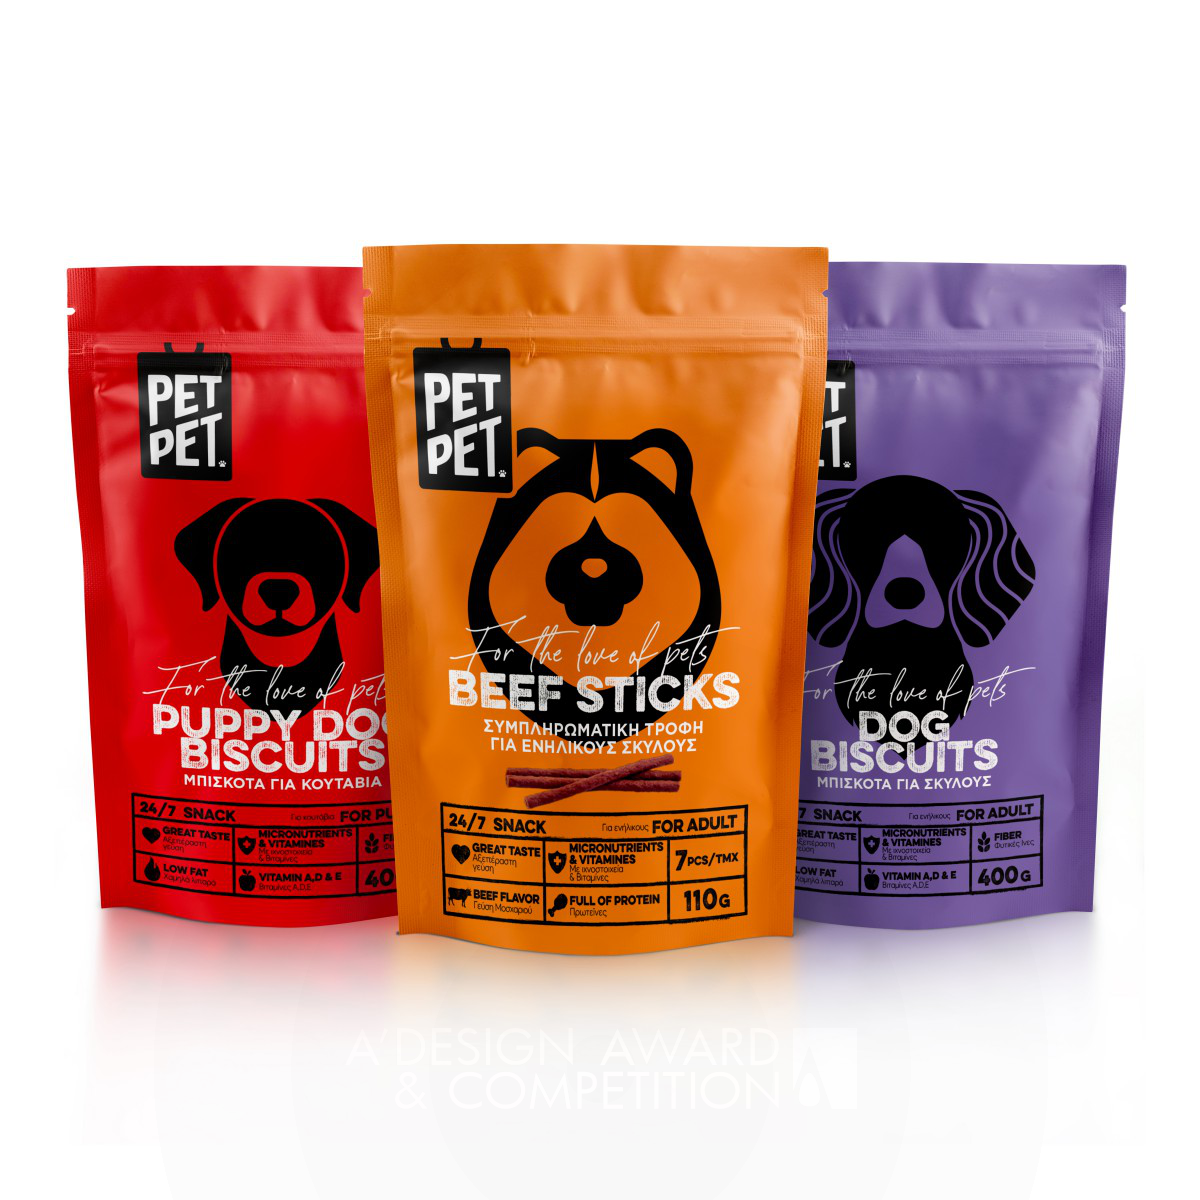 Pop Art Inspired Packaging Redesign for Pets